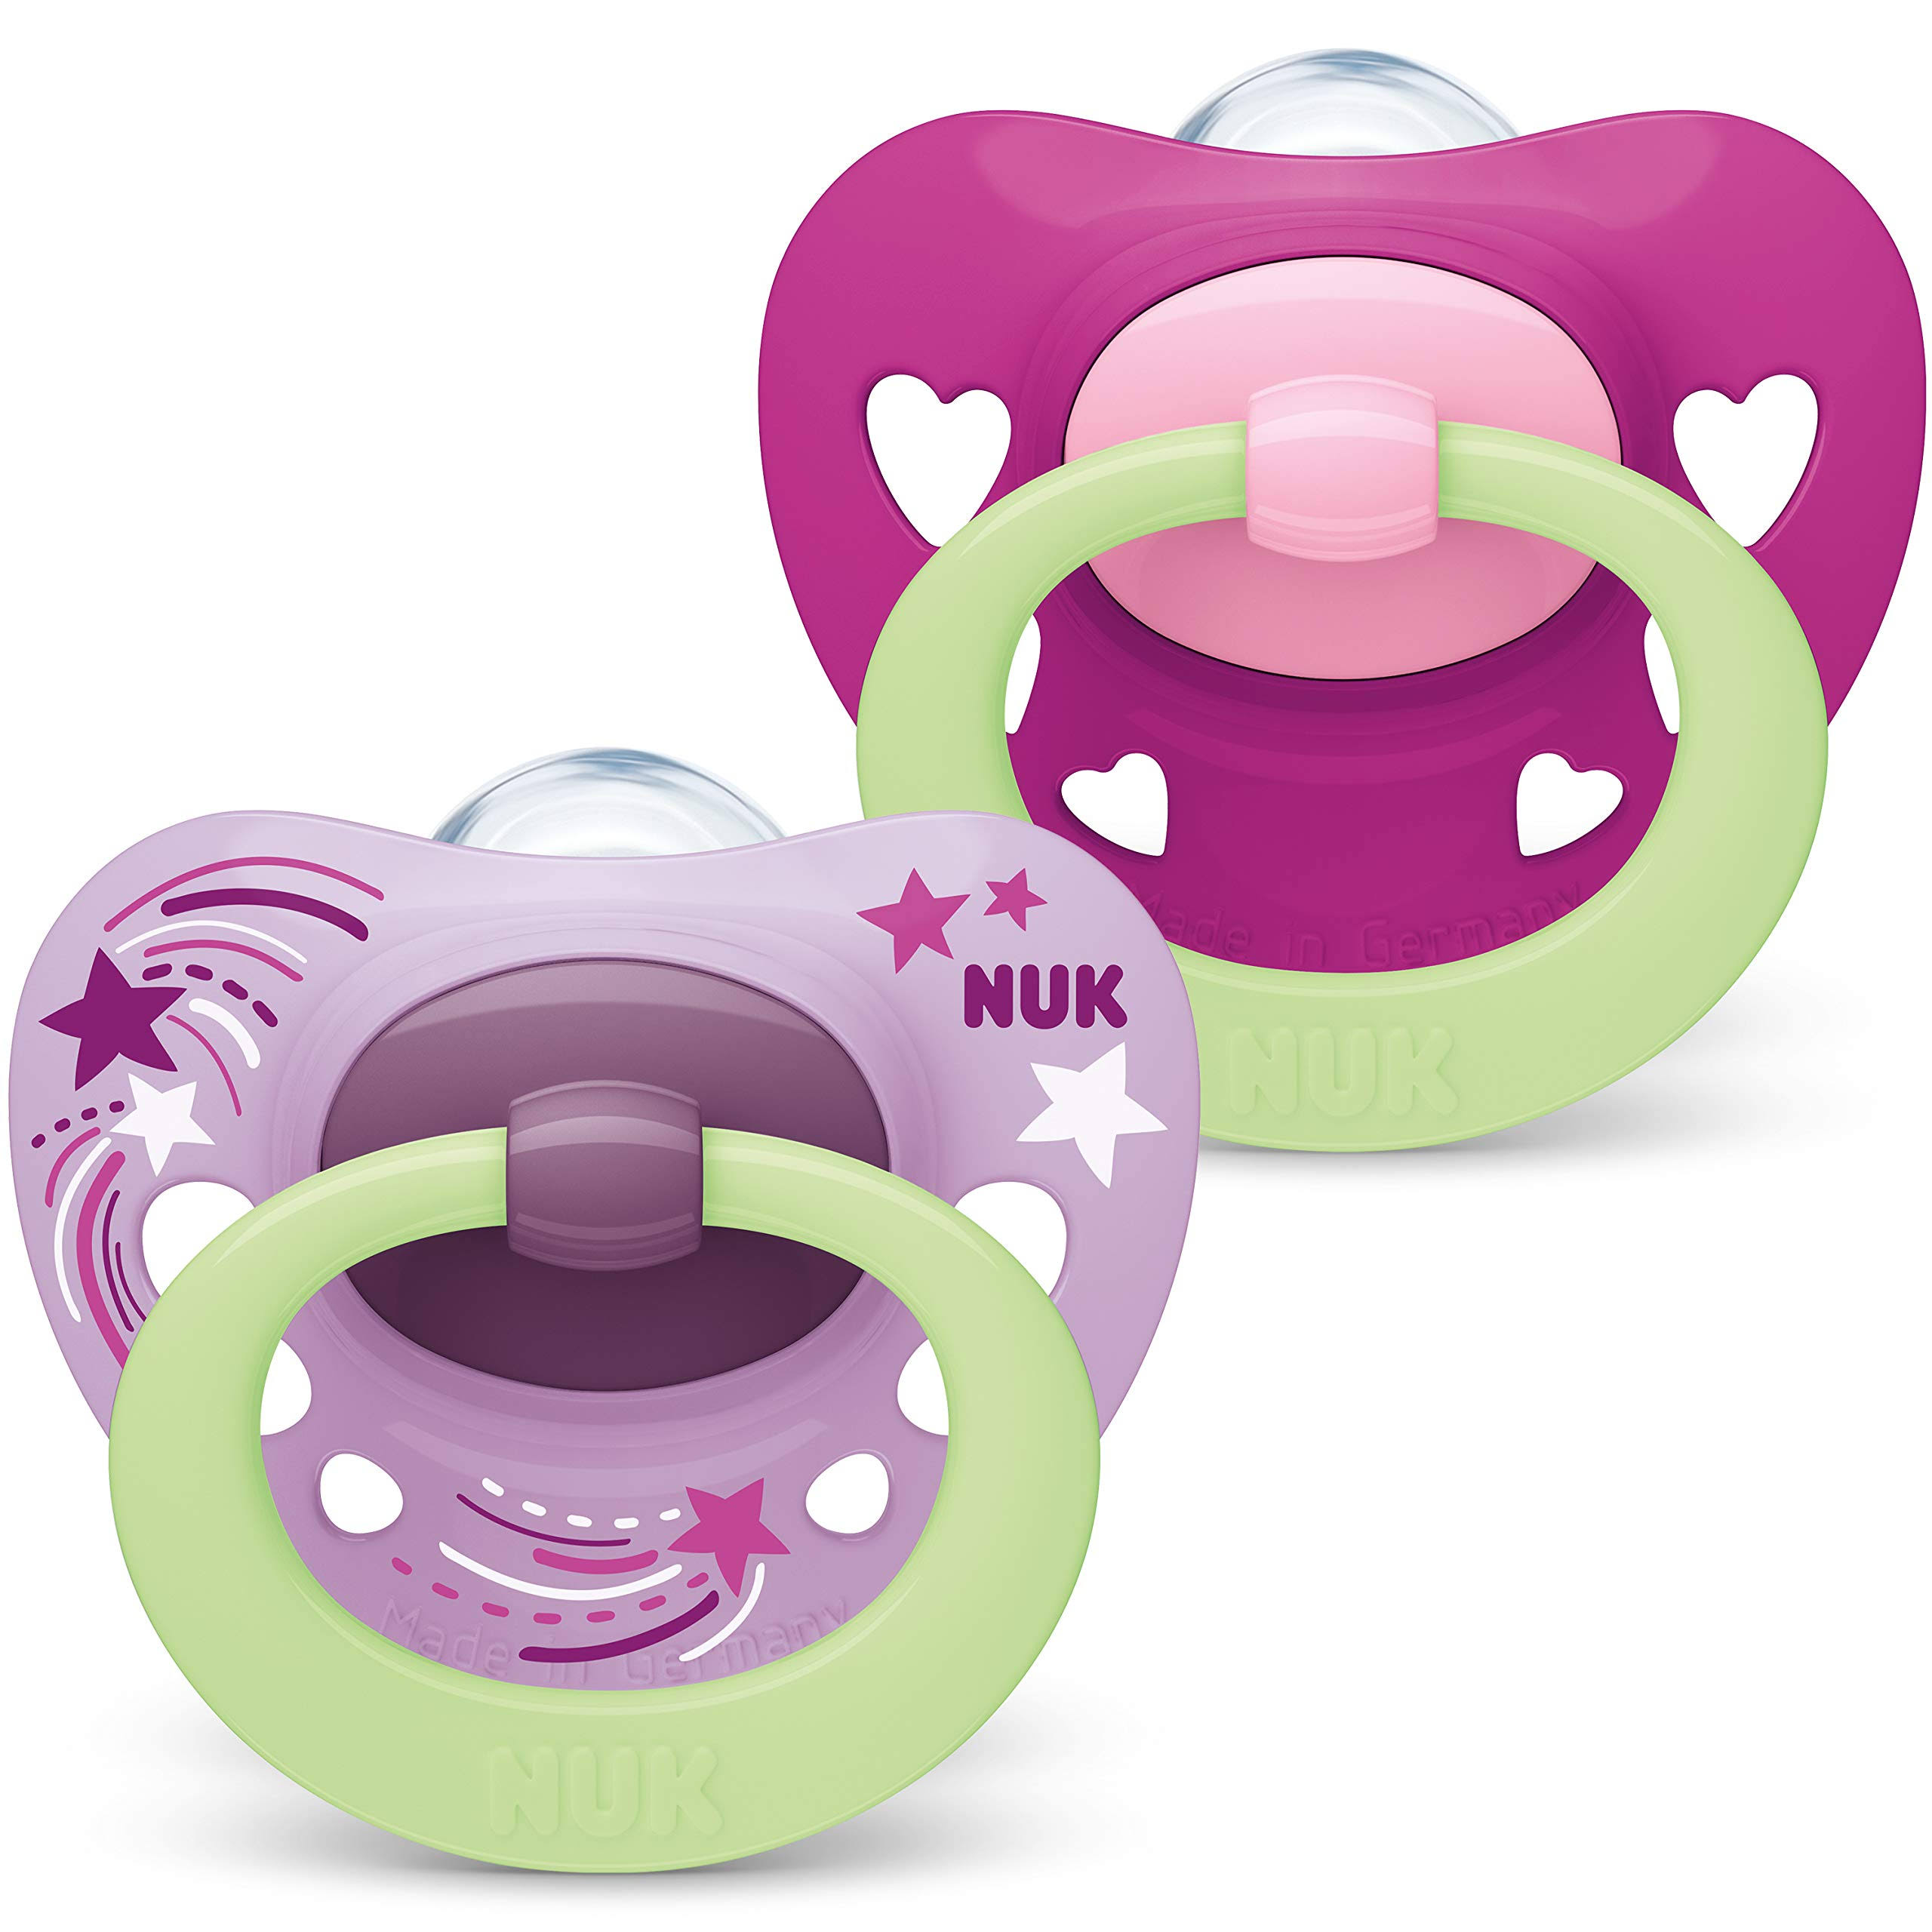 NUK Signature Night Time Soothers - Pink